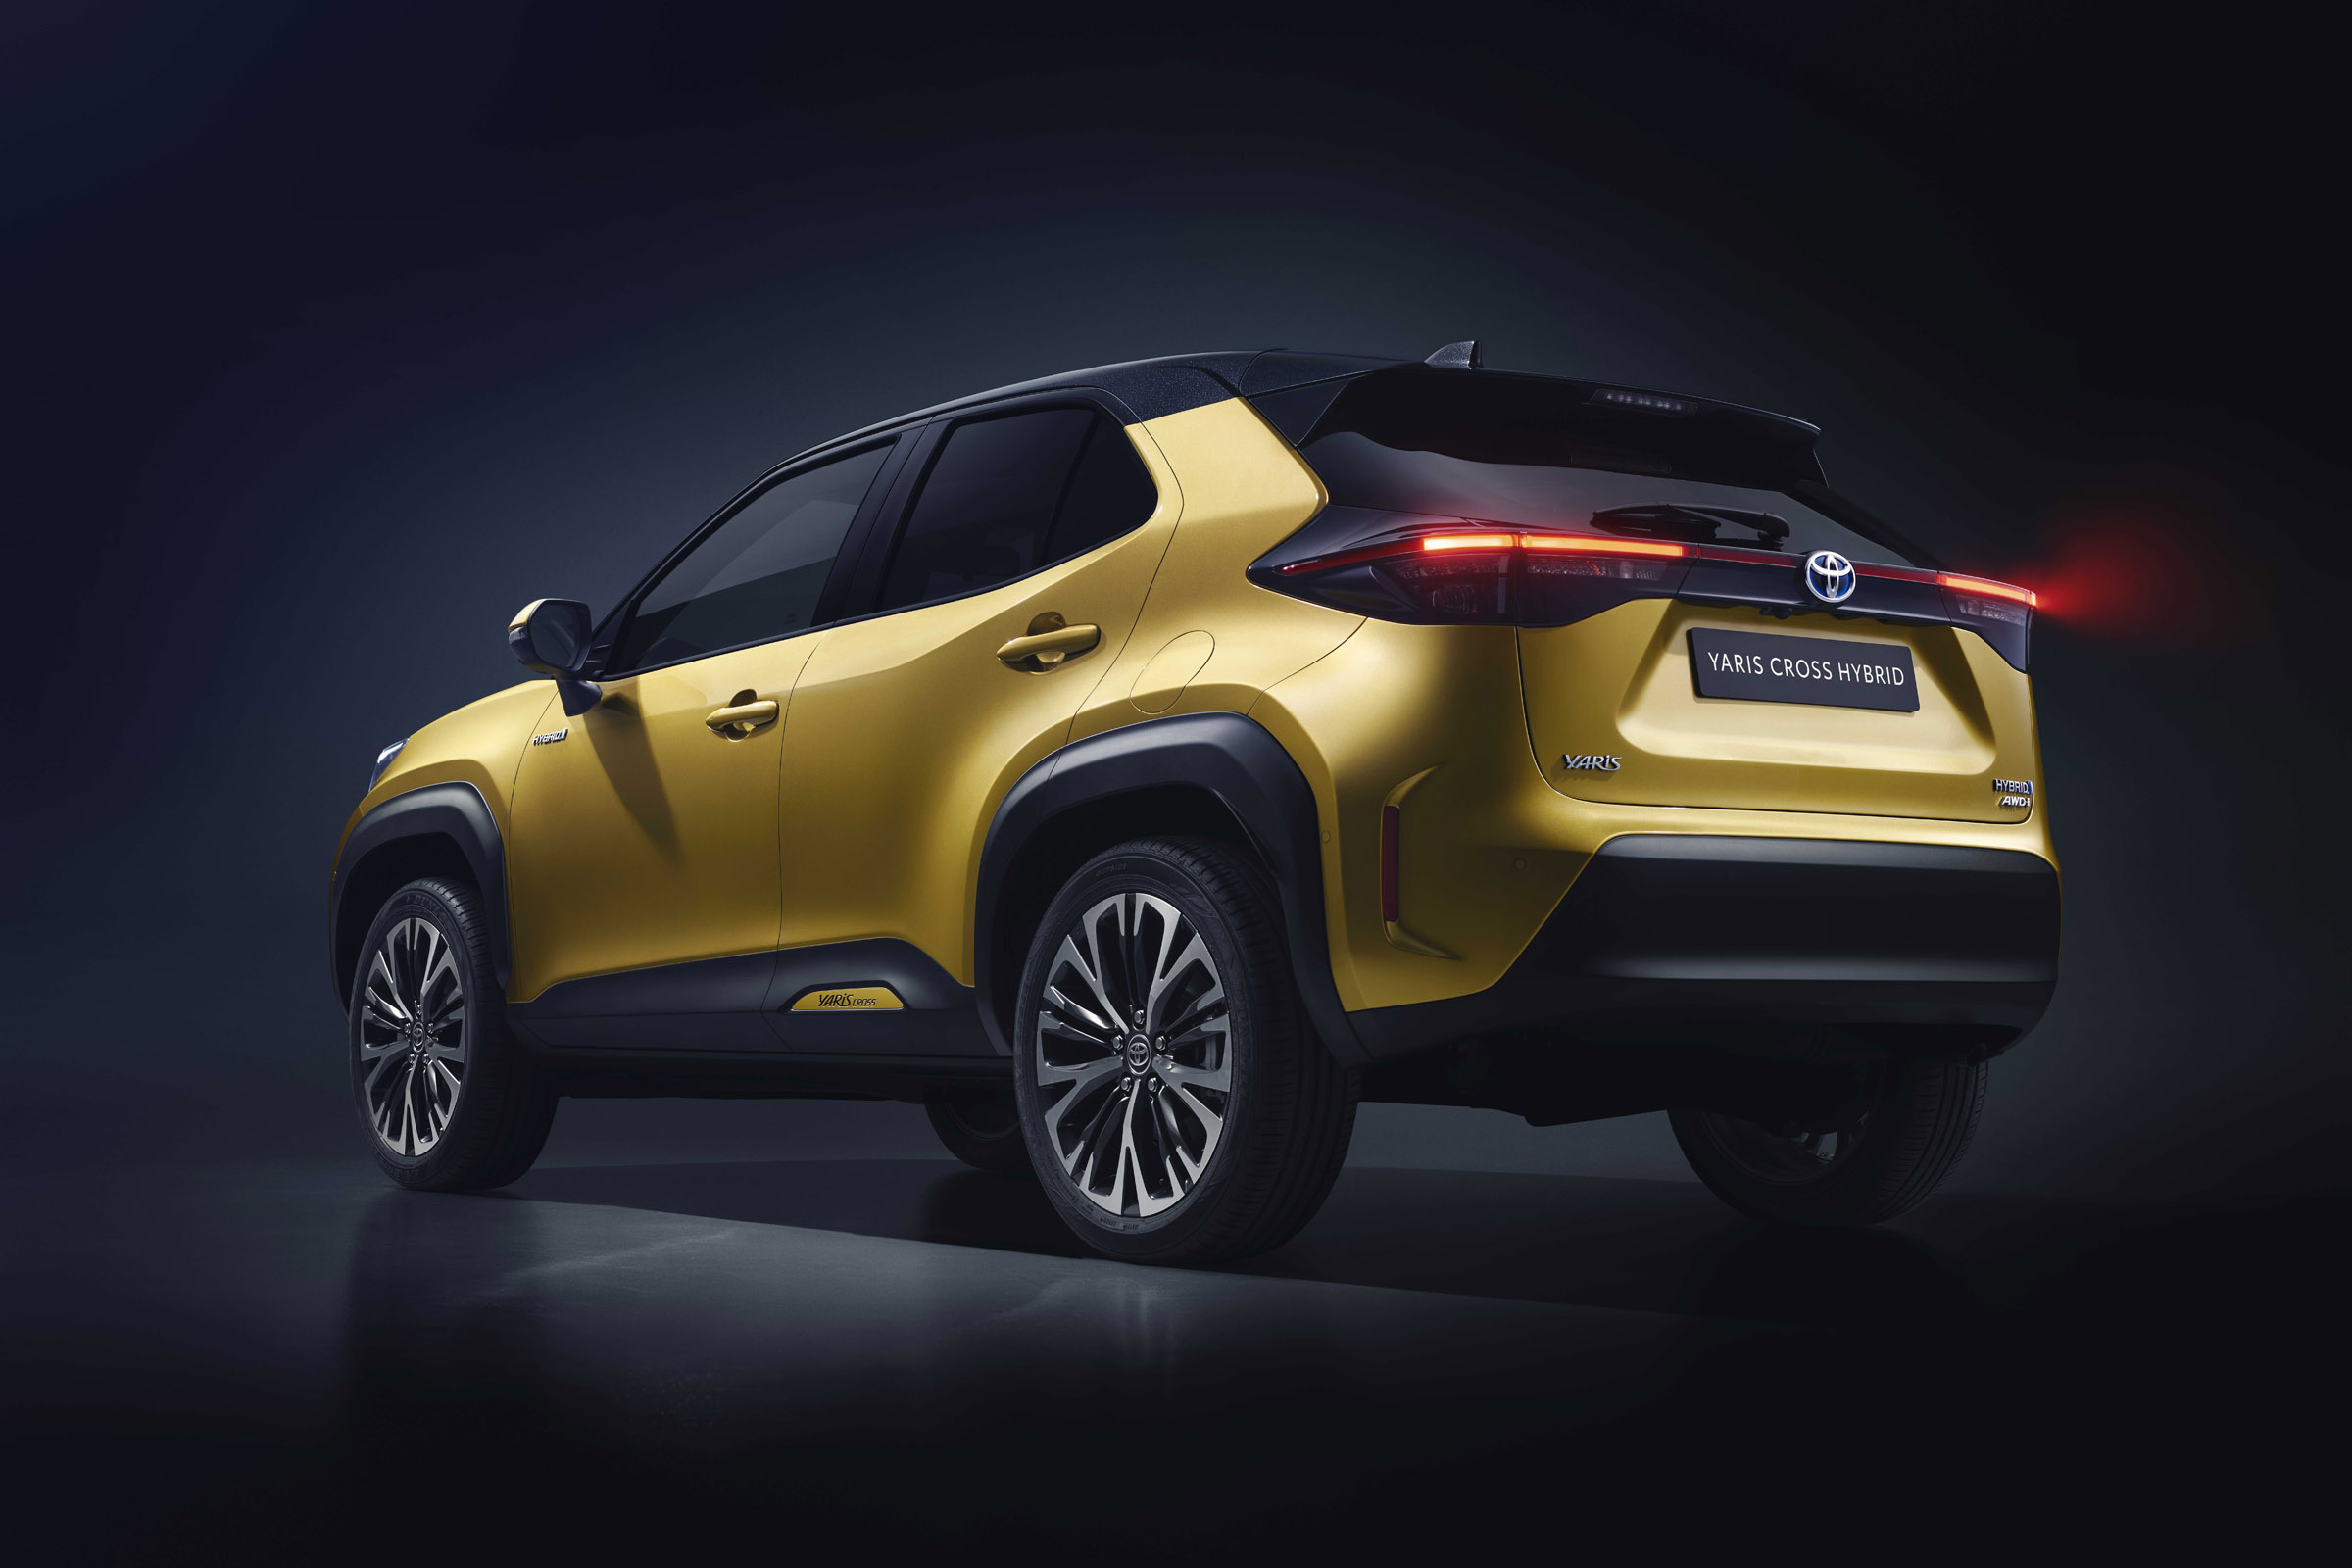 New Toyota Yaris Cross small SUV revealed in full pictures